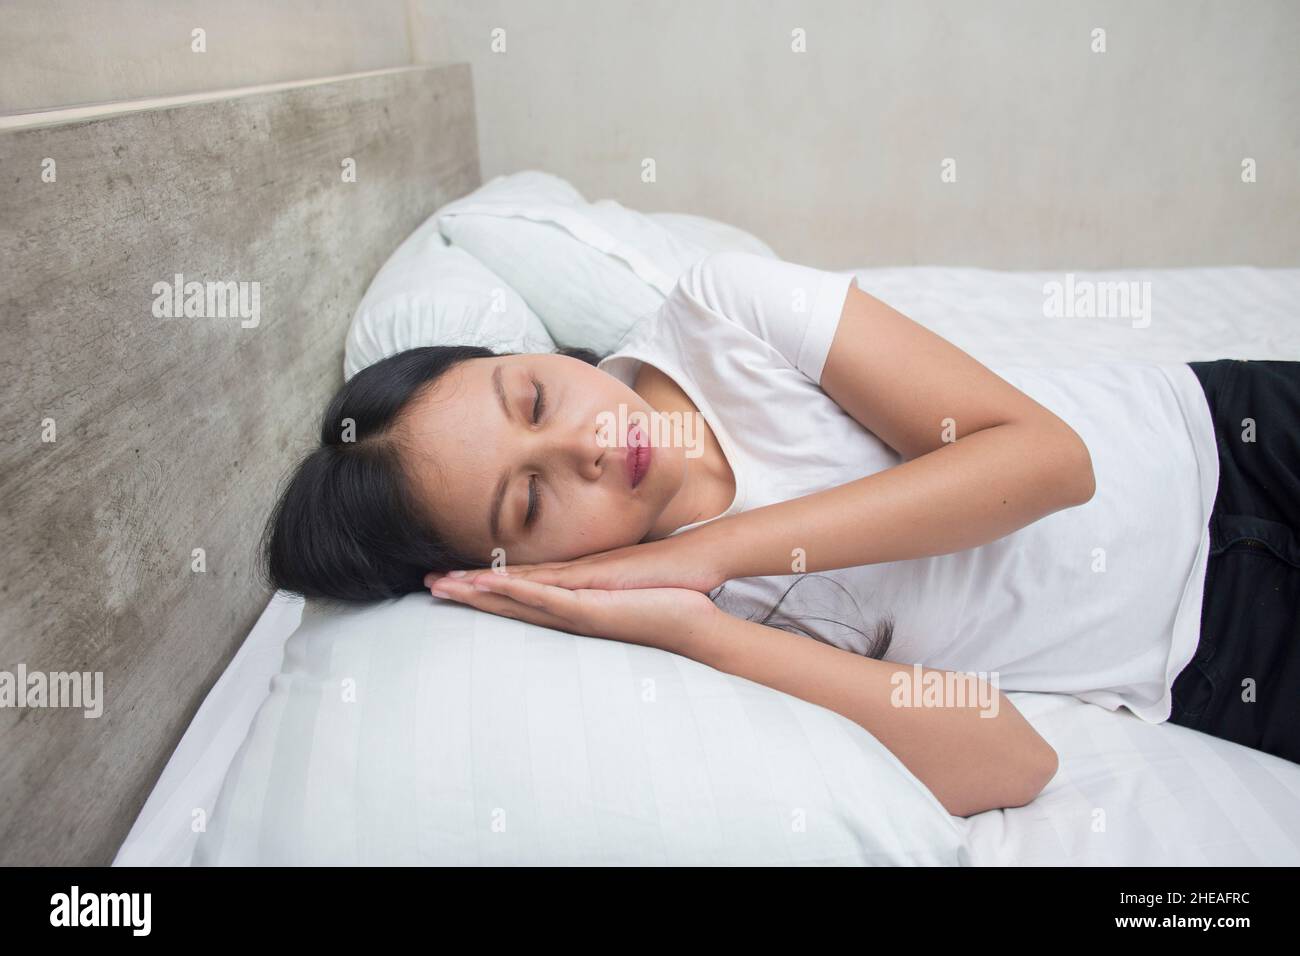 Young asianwoman sleeping tired dreaming. Women pretending to sleep and making gesture. Sleepy tired woman falling asleep being exhausted. Stock Photo